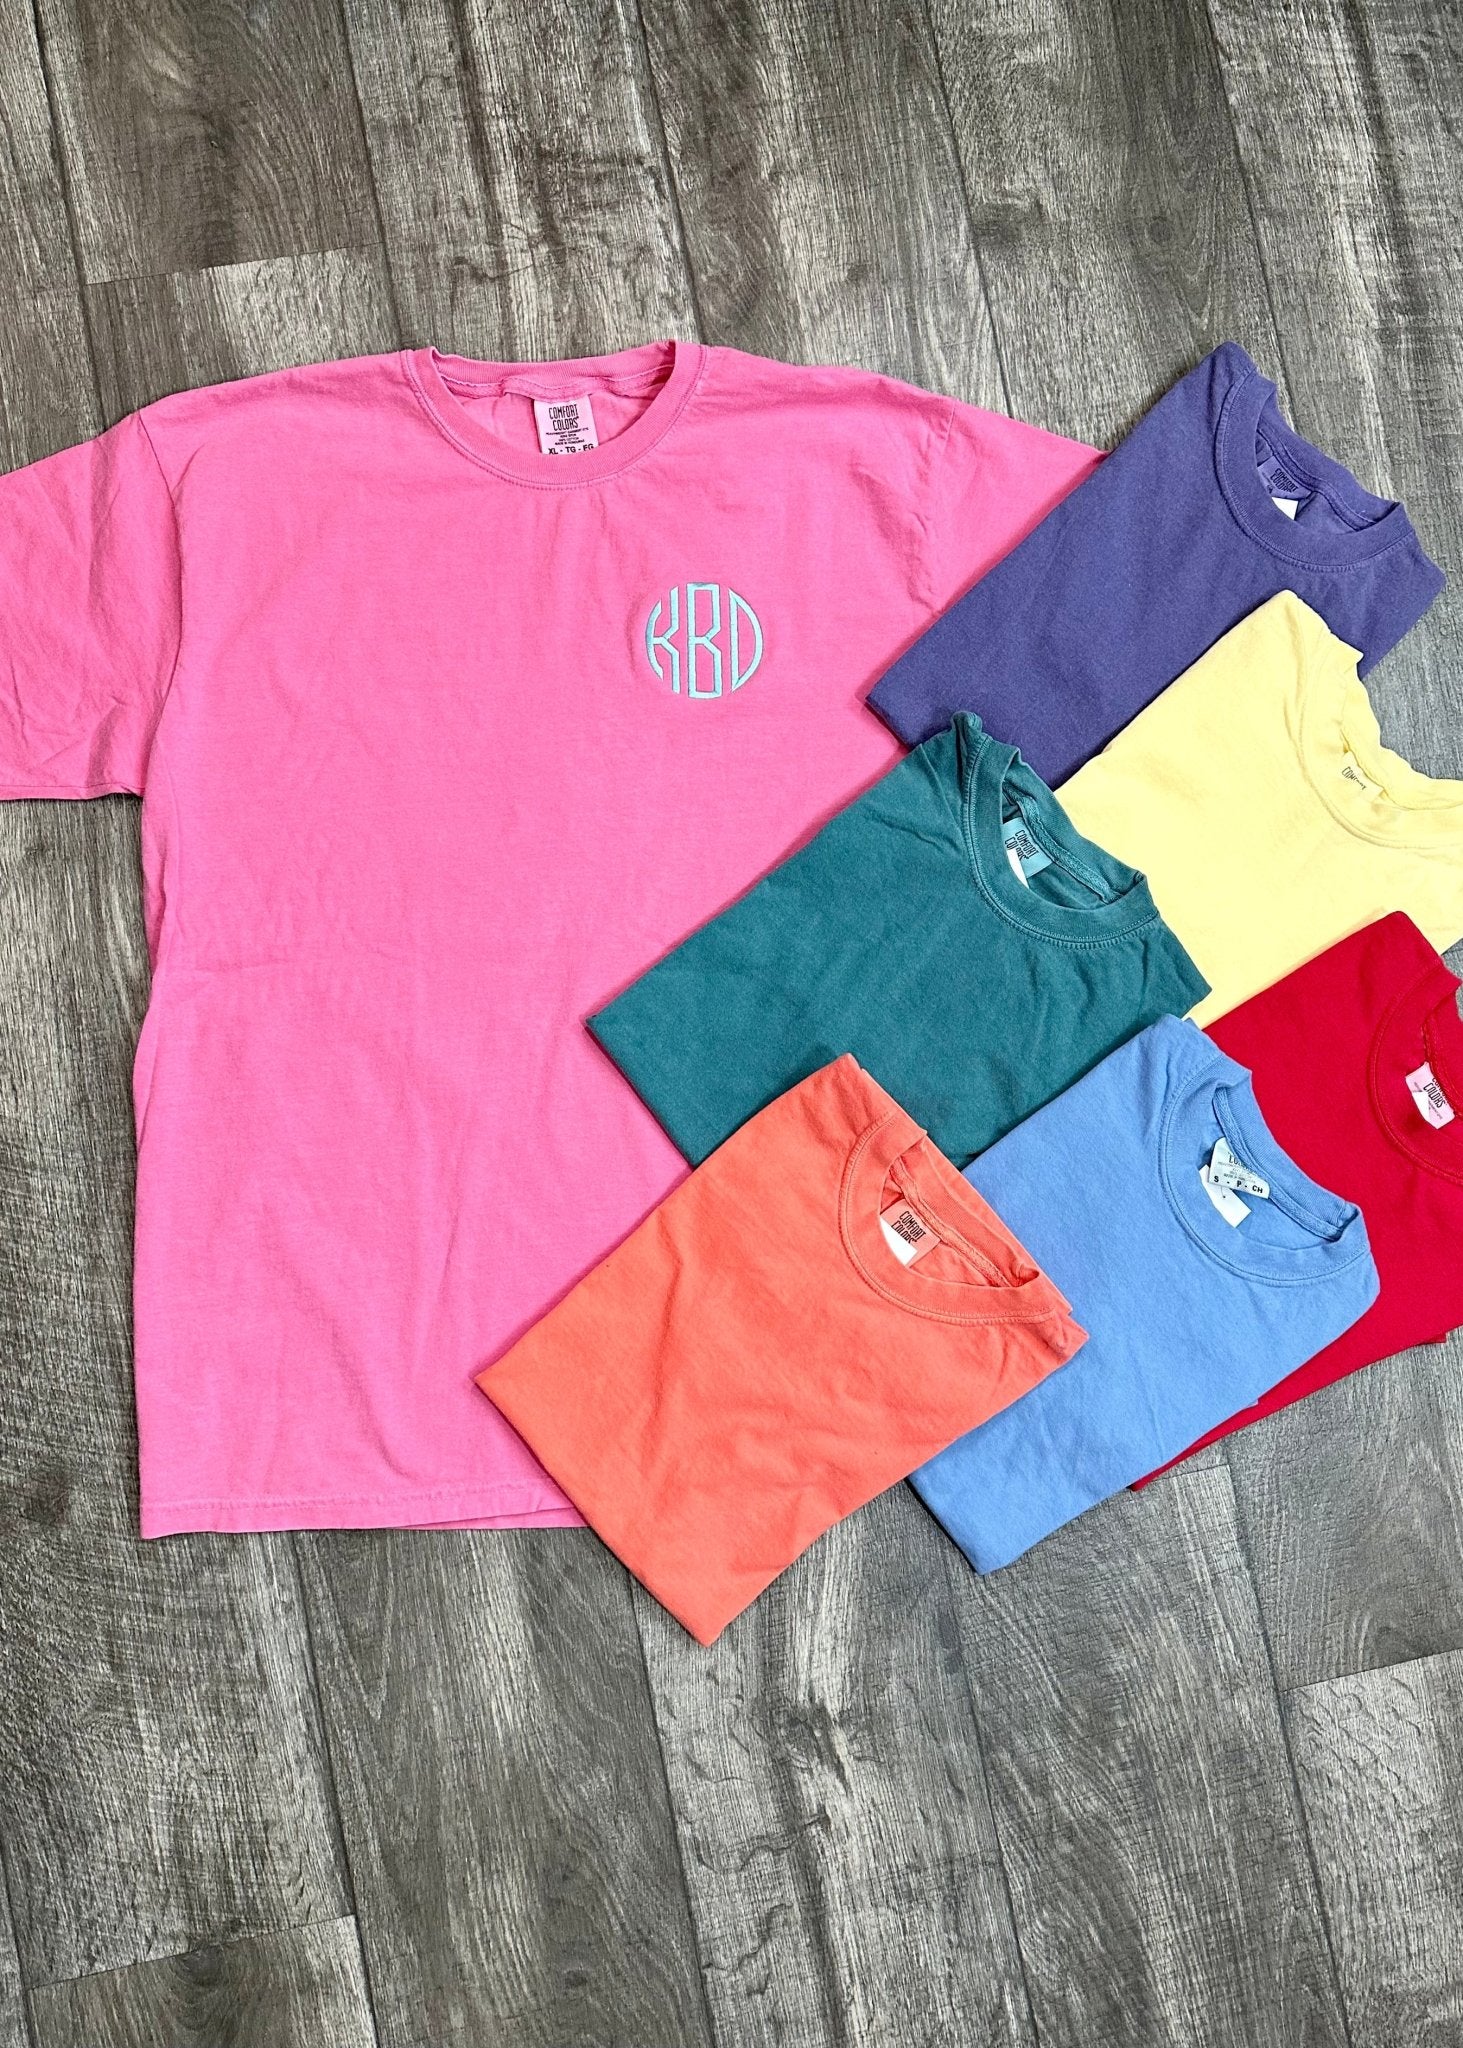 Monogrammed Comfort Colors Short Sleeve T-Shirt - Jimberly's Boutique